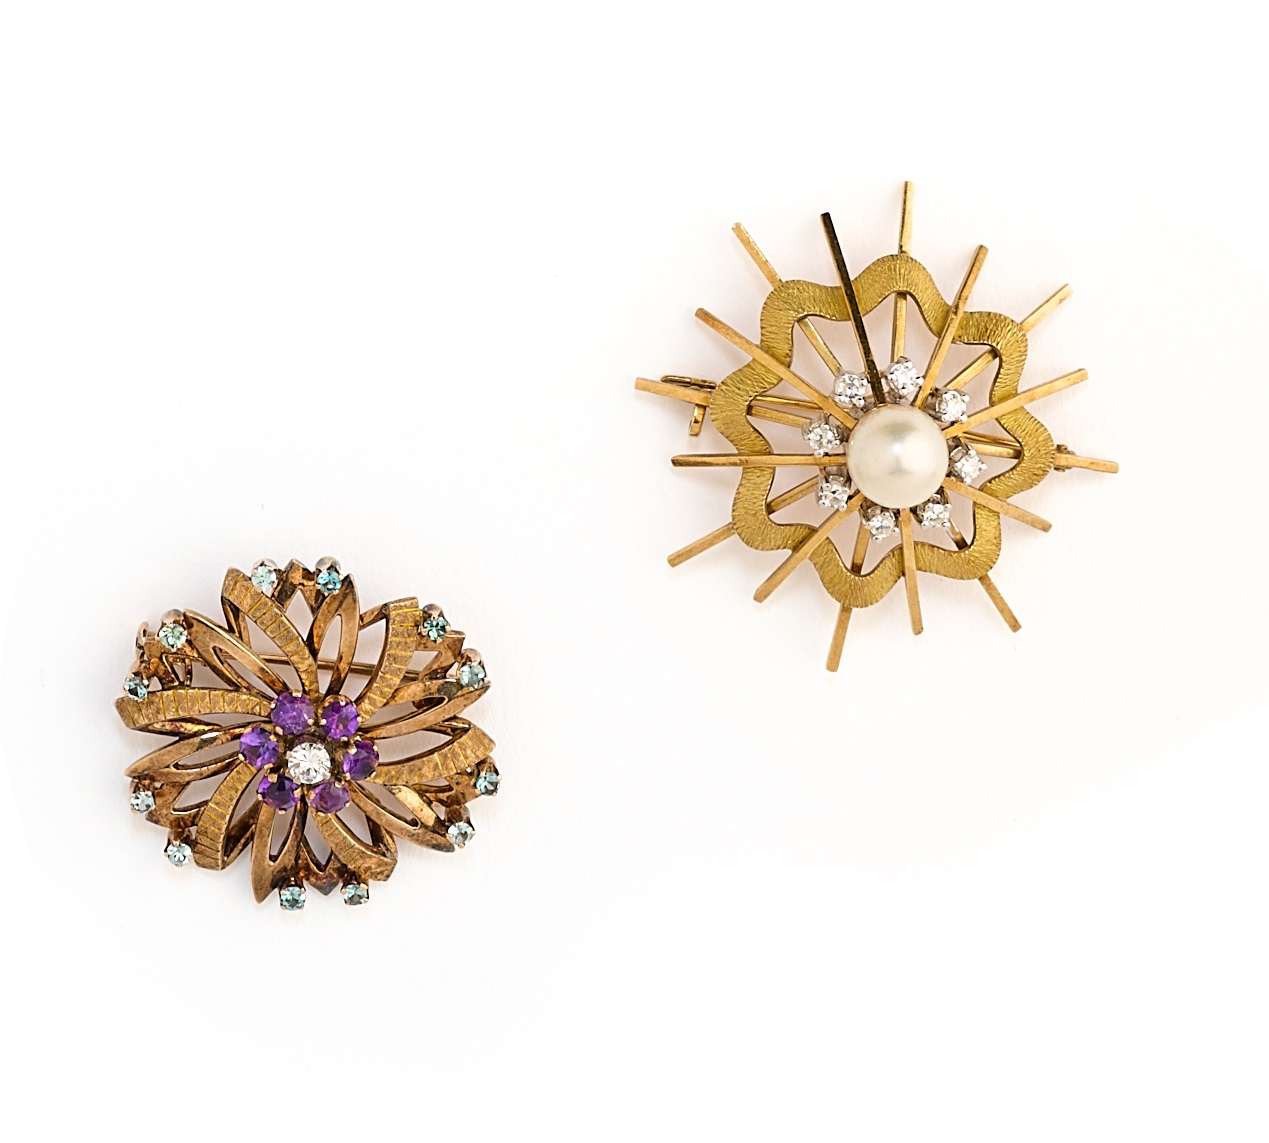 TWO GEM-SET BROOCHES, 1960s